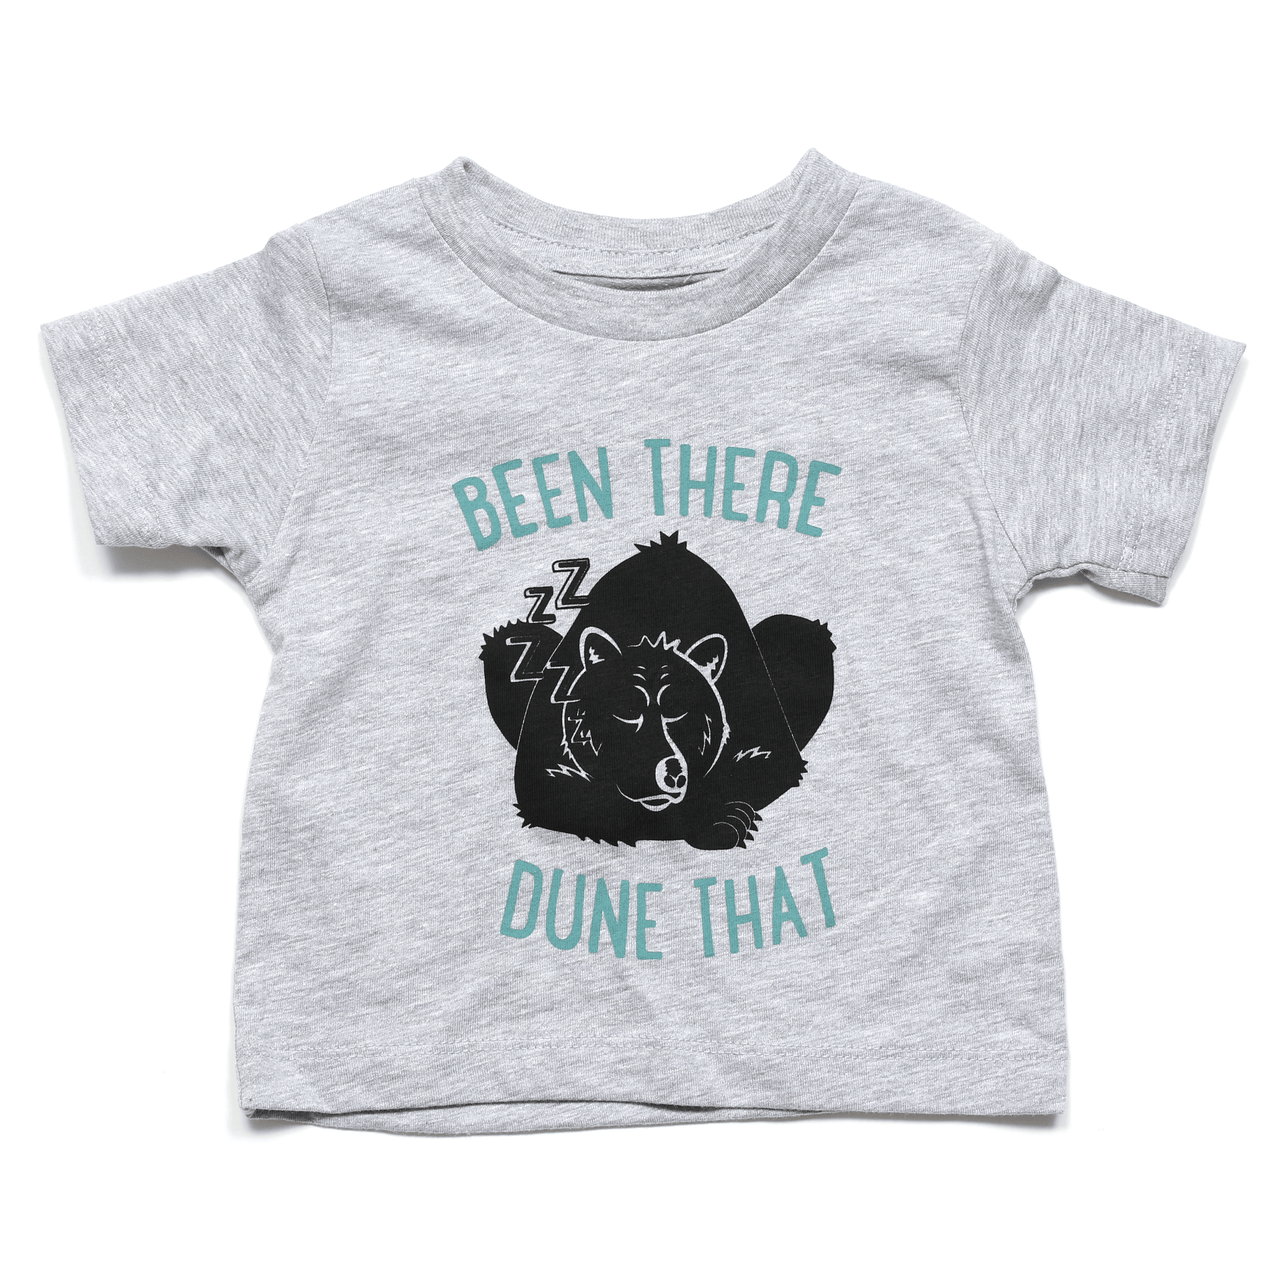 Been There, Dune That Infant Tee